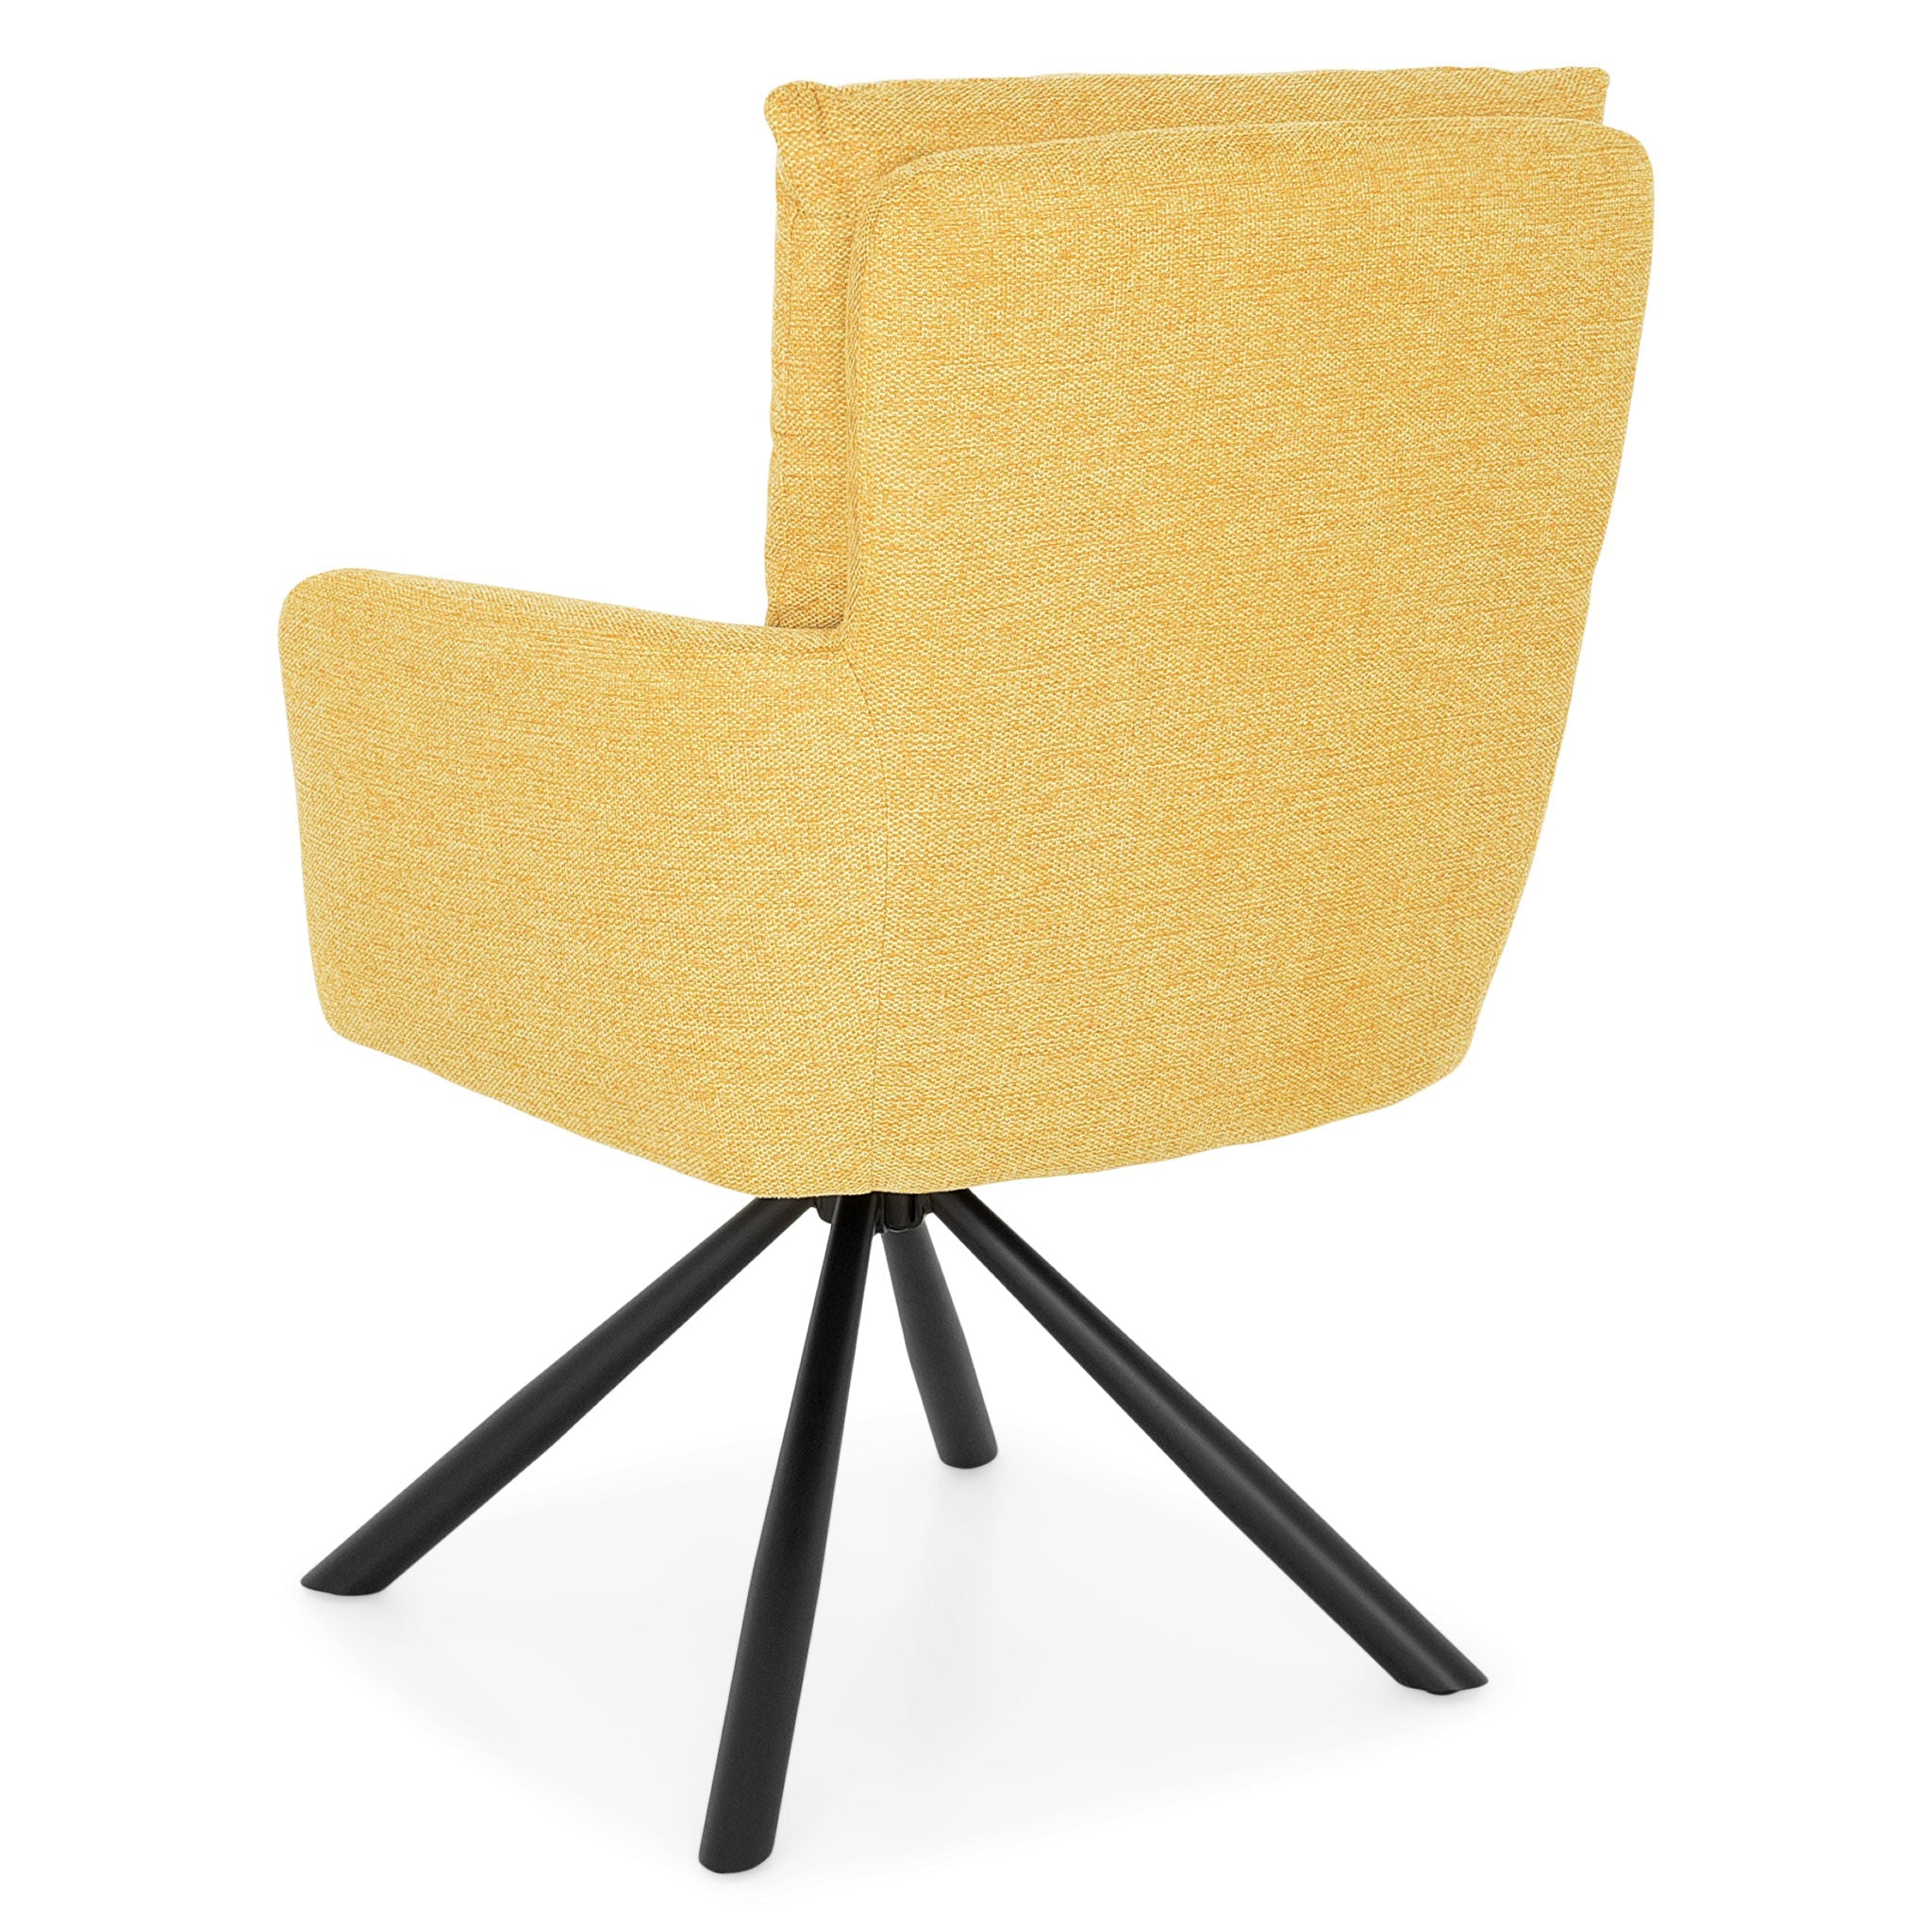 FONDHOUSE Ruvel Swivel Chair